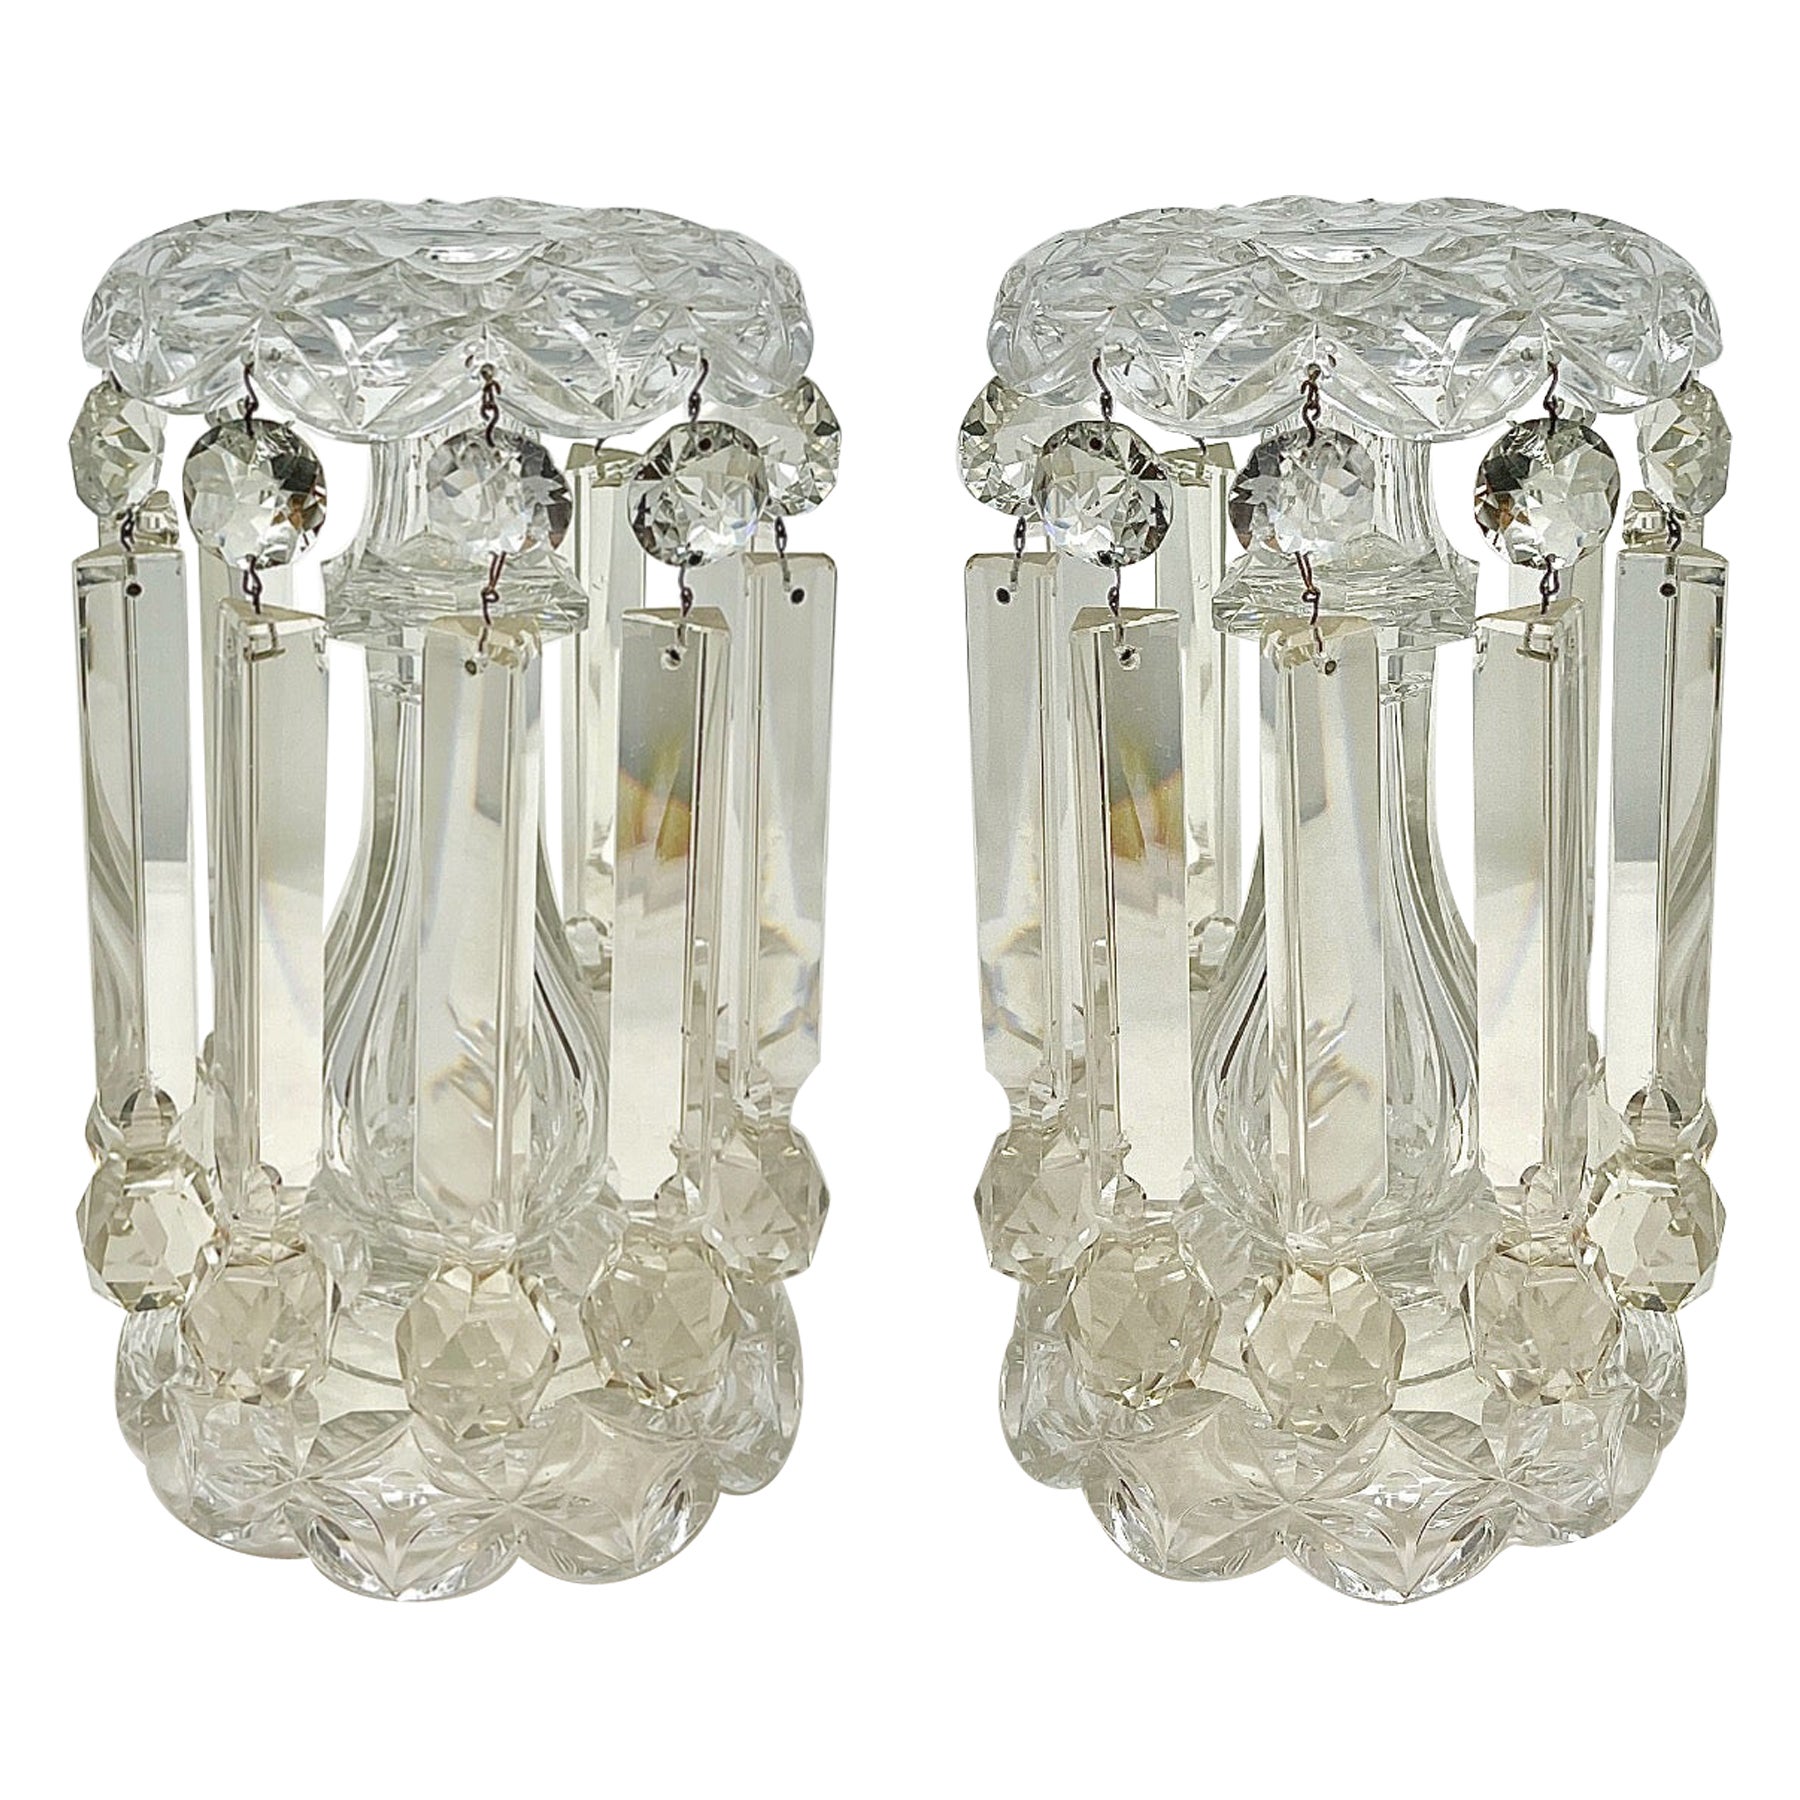 Pair Antique French Baccarat Cut Crystal Lusters or Candleholders, Circa 1860's. For Sale